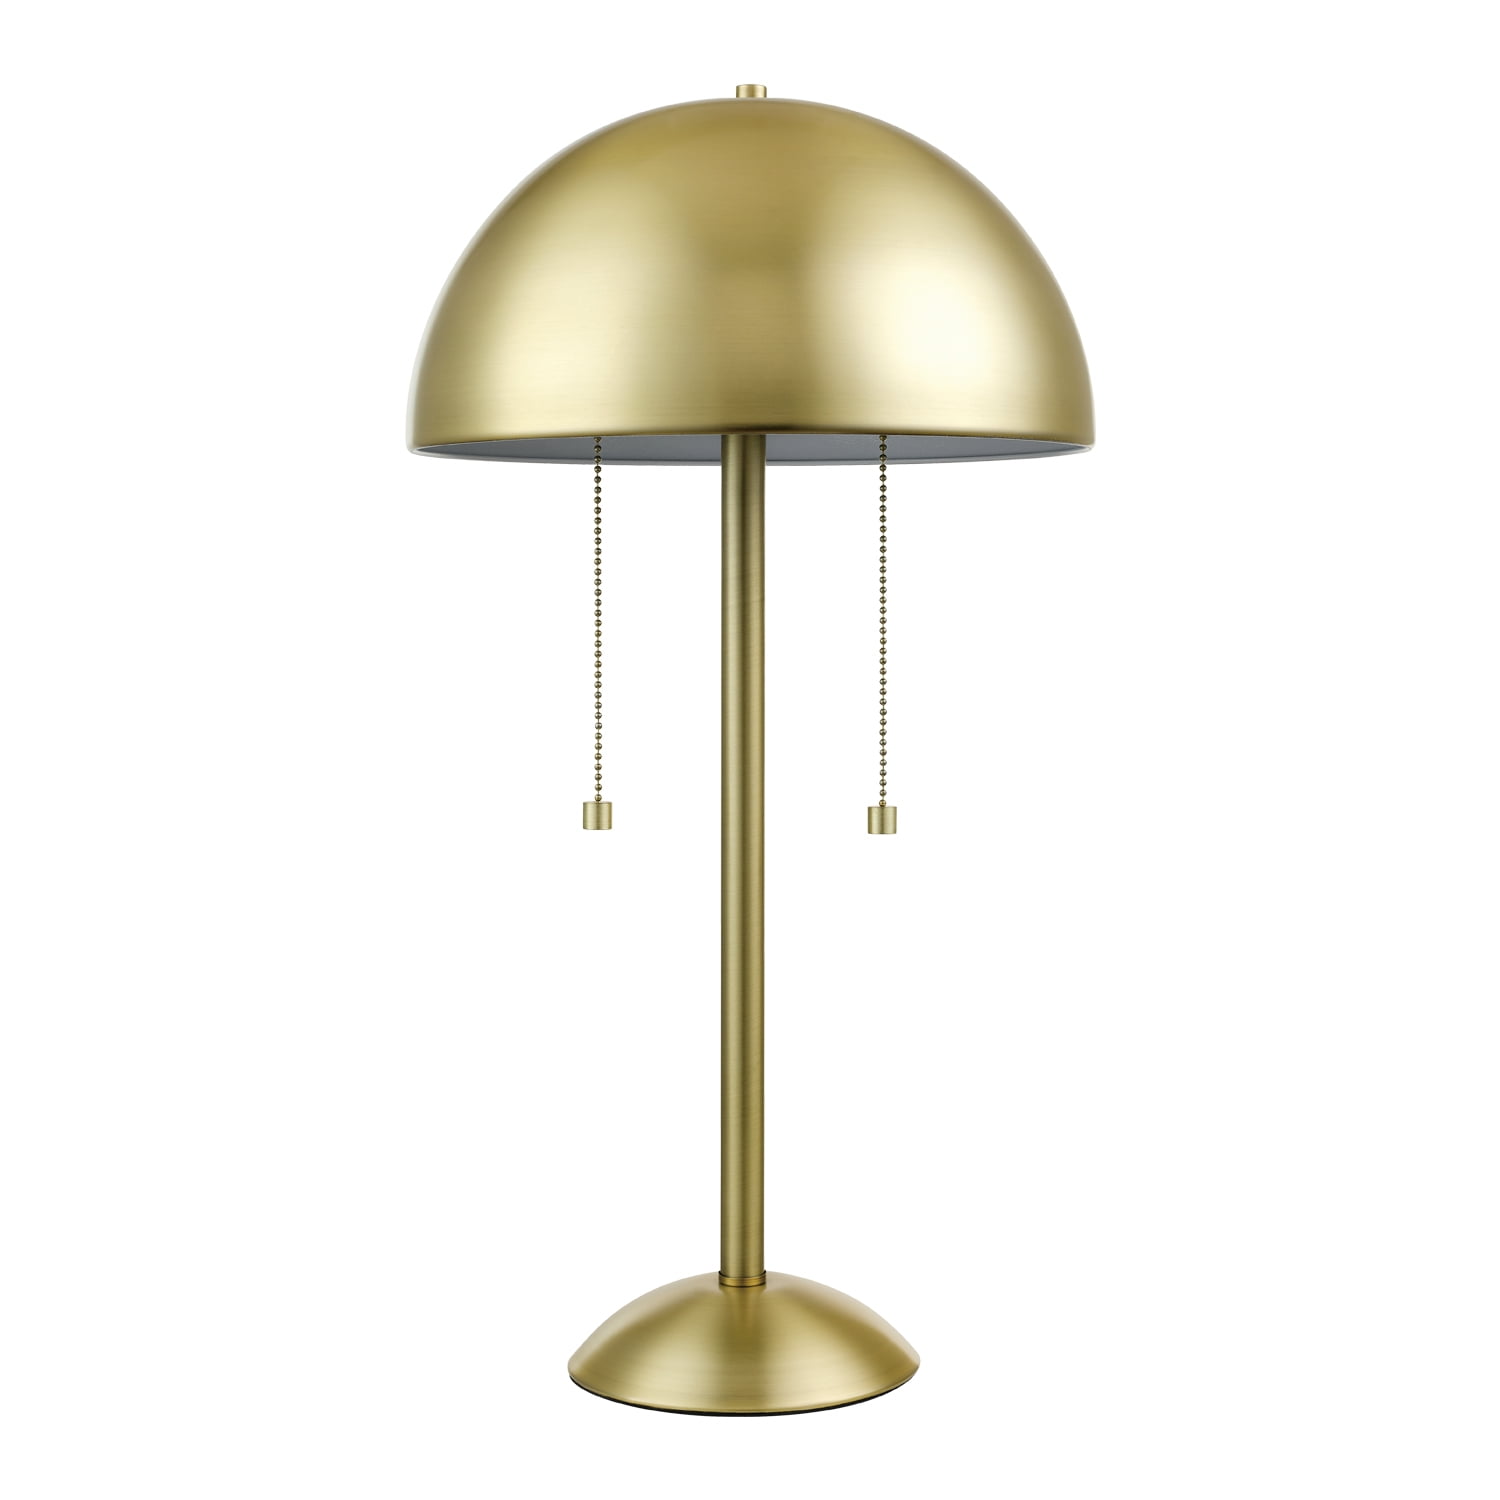 2 Light Matte Brass Table Lamp 12976, Grn Table Lamp With Led Bulb Frosted Glass Whiteboard